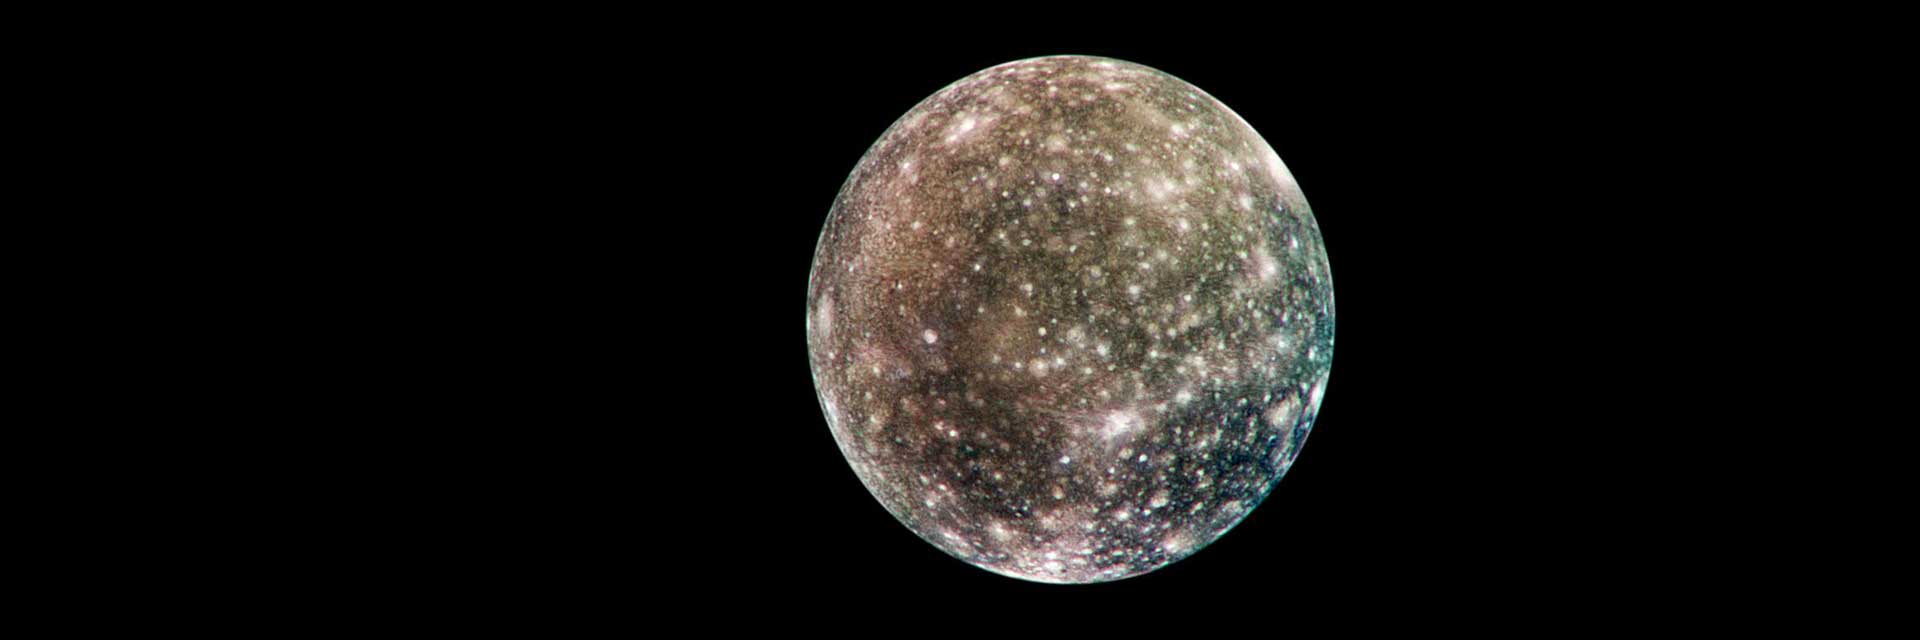 Bright scars on a darker surface testify to a long history of impacts on Jupiter's moon Callisto in this image of Callisto from NASA's Galileo spacecraft.